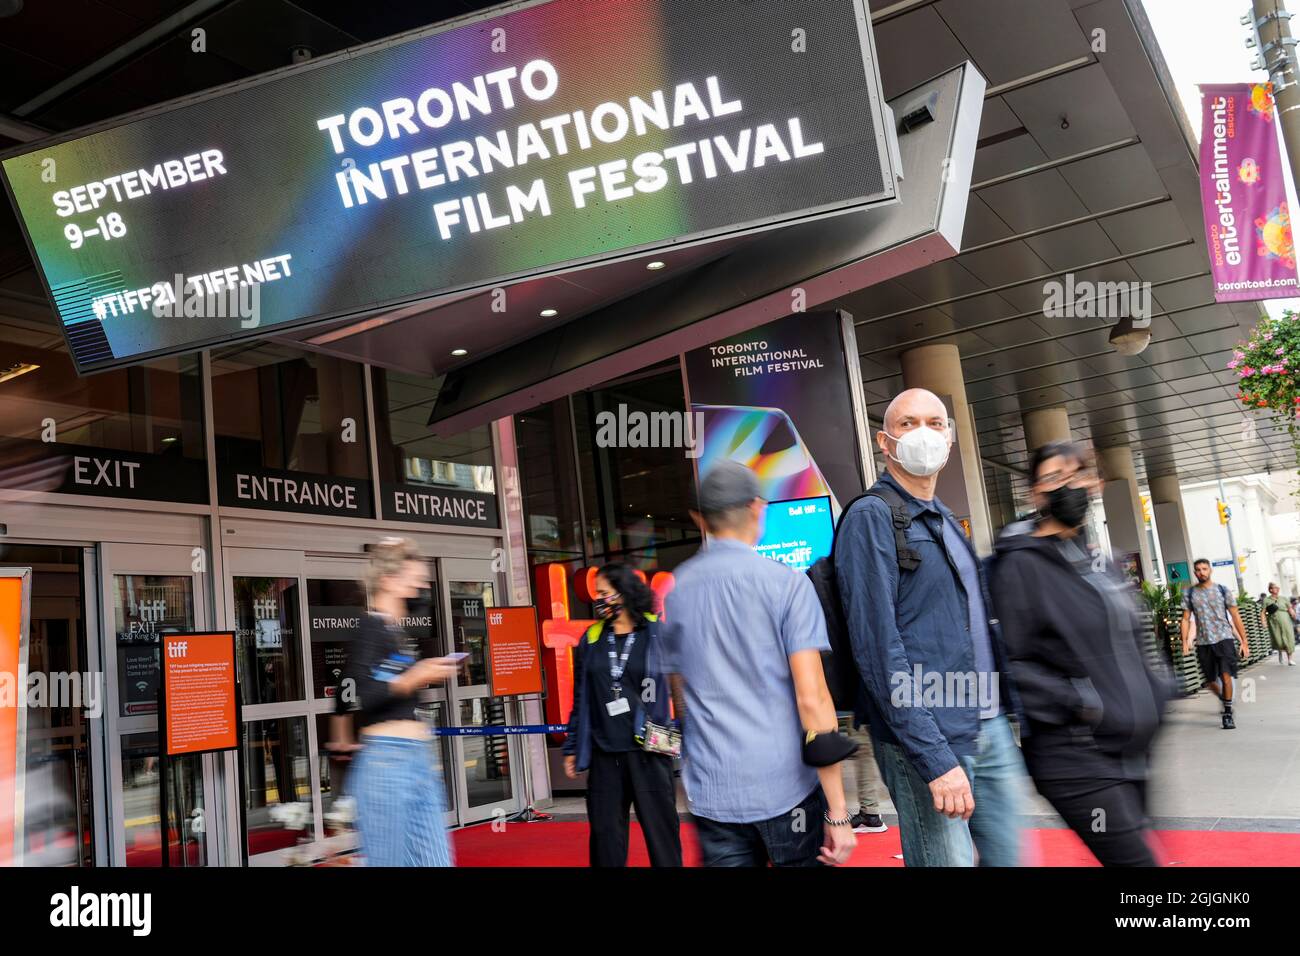 People are seen outside the TIFF Bell Lightbox building, headquarters of the Toronto International Film Festival (TIFF), in Toronto, Canada, September 9, 2021. REUTERS/Mark Blinch Stock Photo